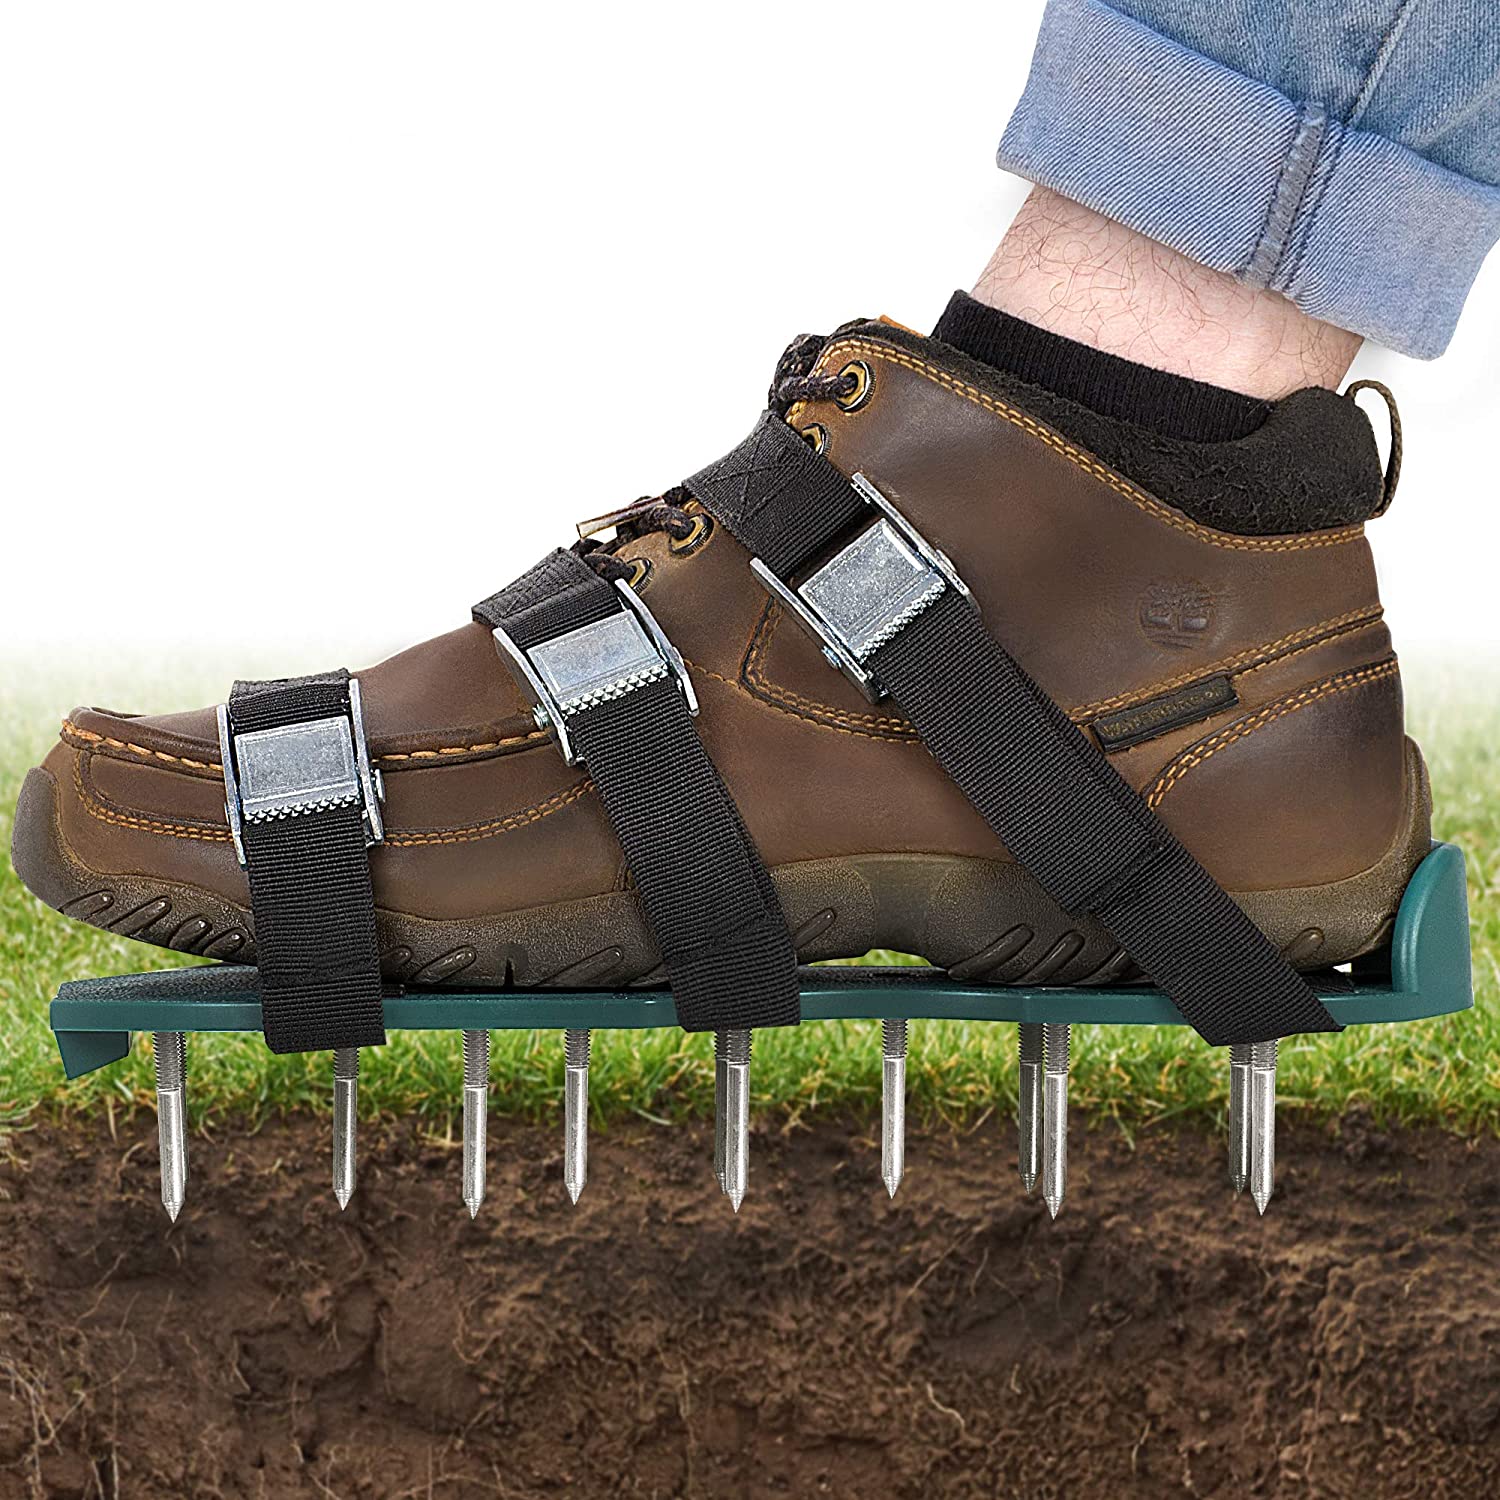 Lawn Sod Aerators shoes Spikes Aerating Sandals Garden Grass Tools N9D6 